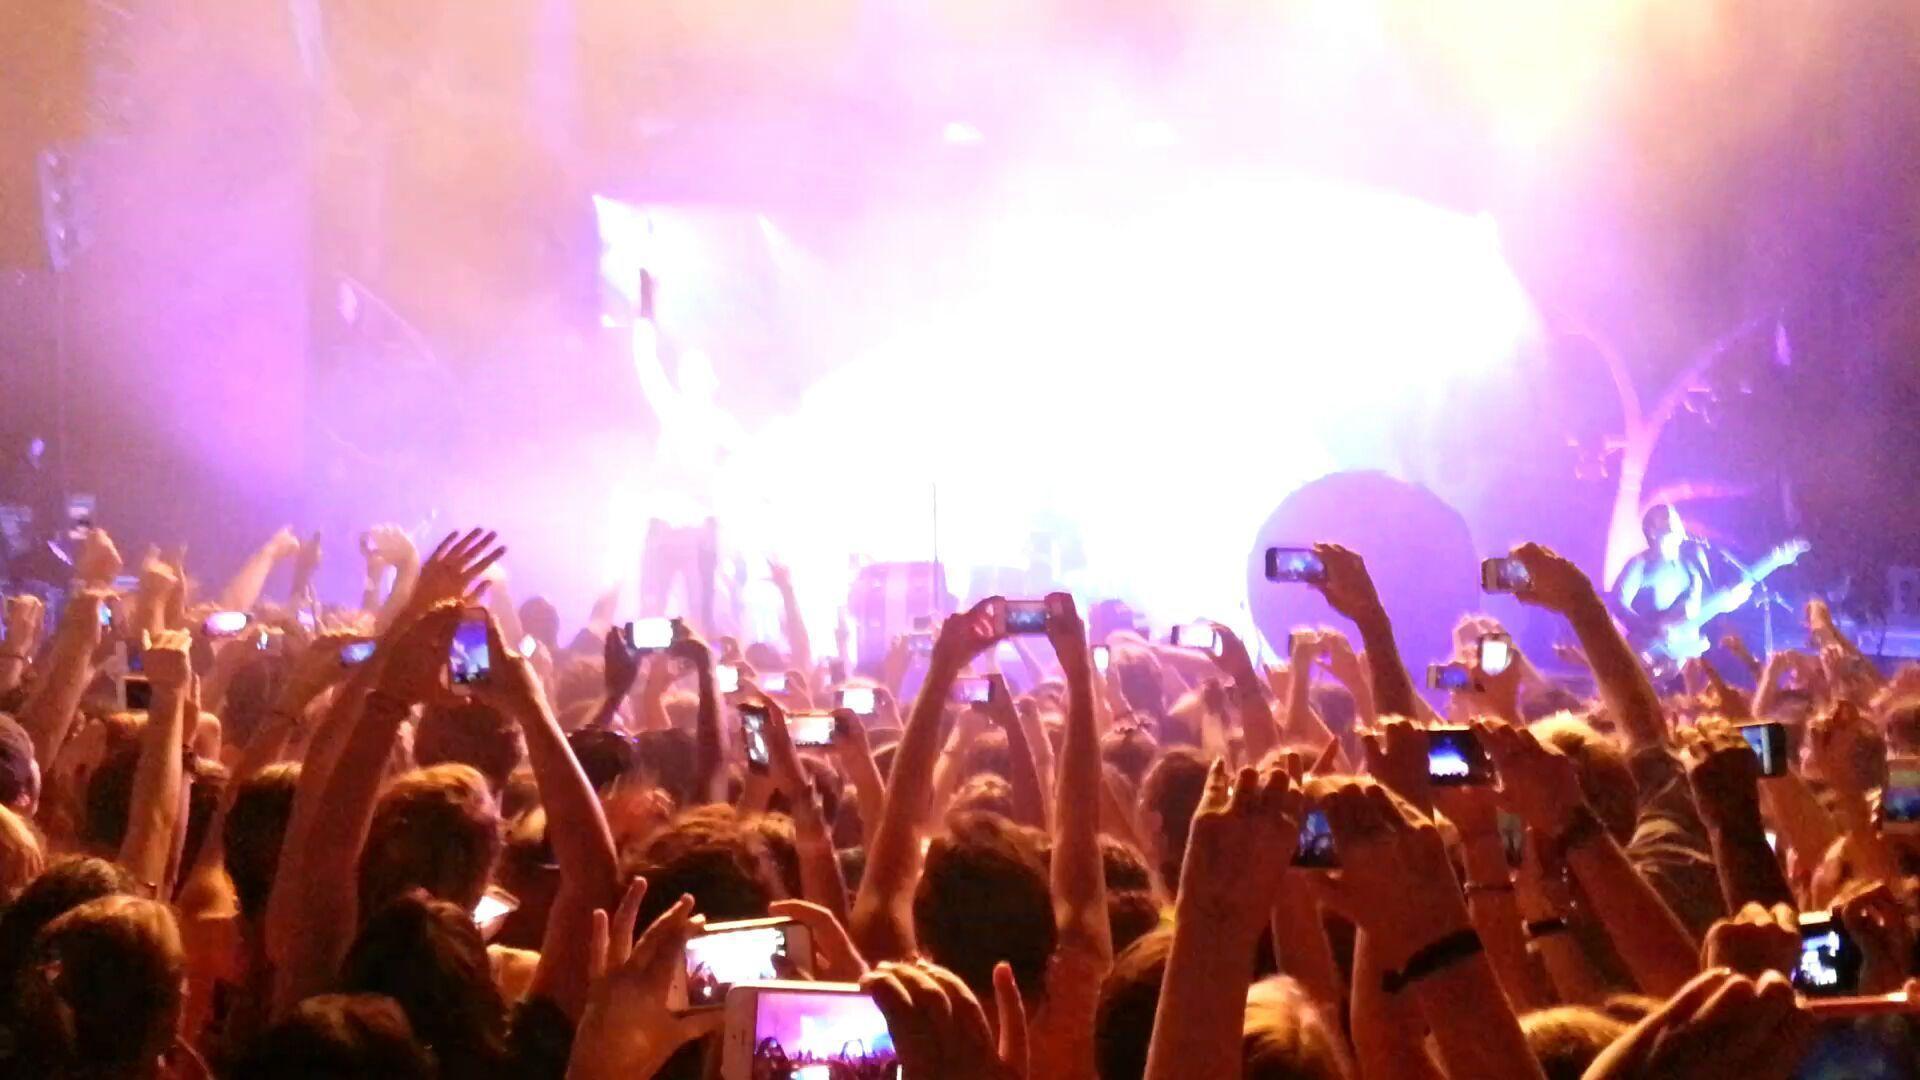 Imagine Dragons, the band performing wallpaper and image